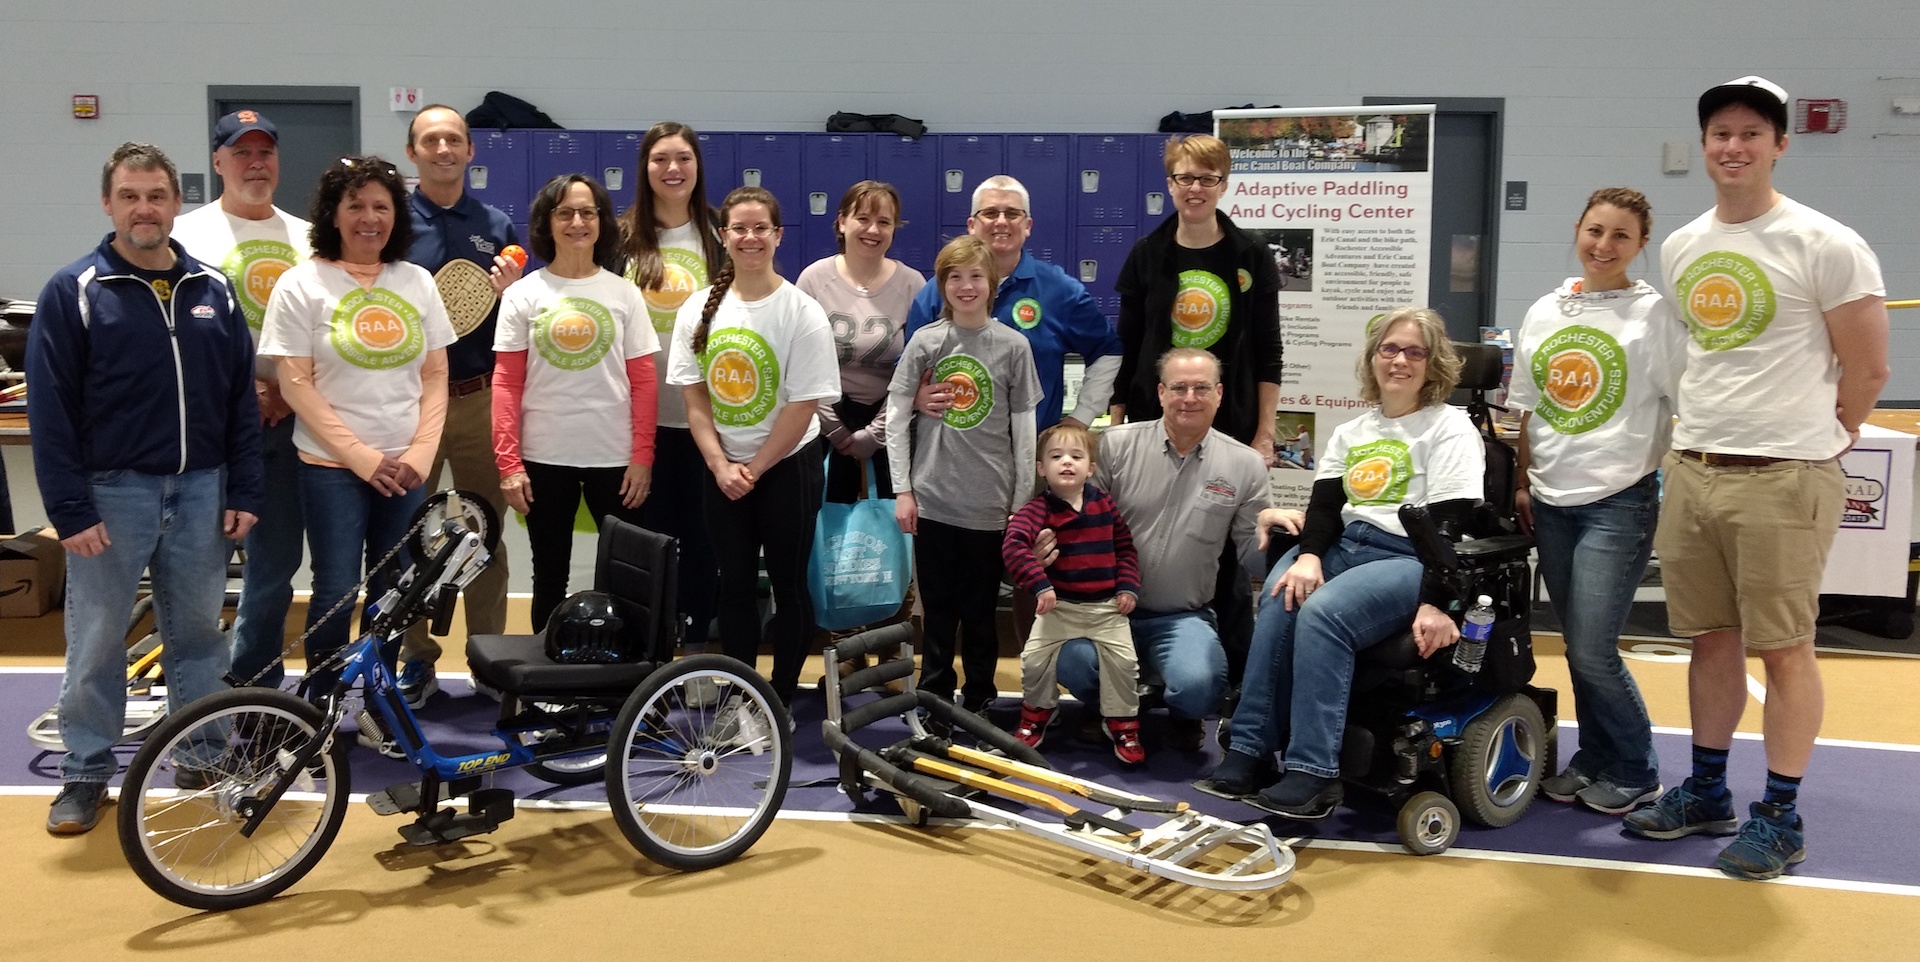 A large group of people is posed for a photo; an adaptive cycle and a hockey sled are in front of the group. Many in the group are wearing RAA tshirts.